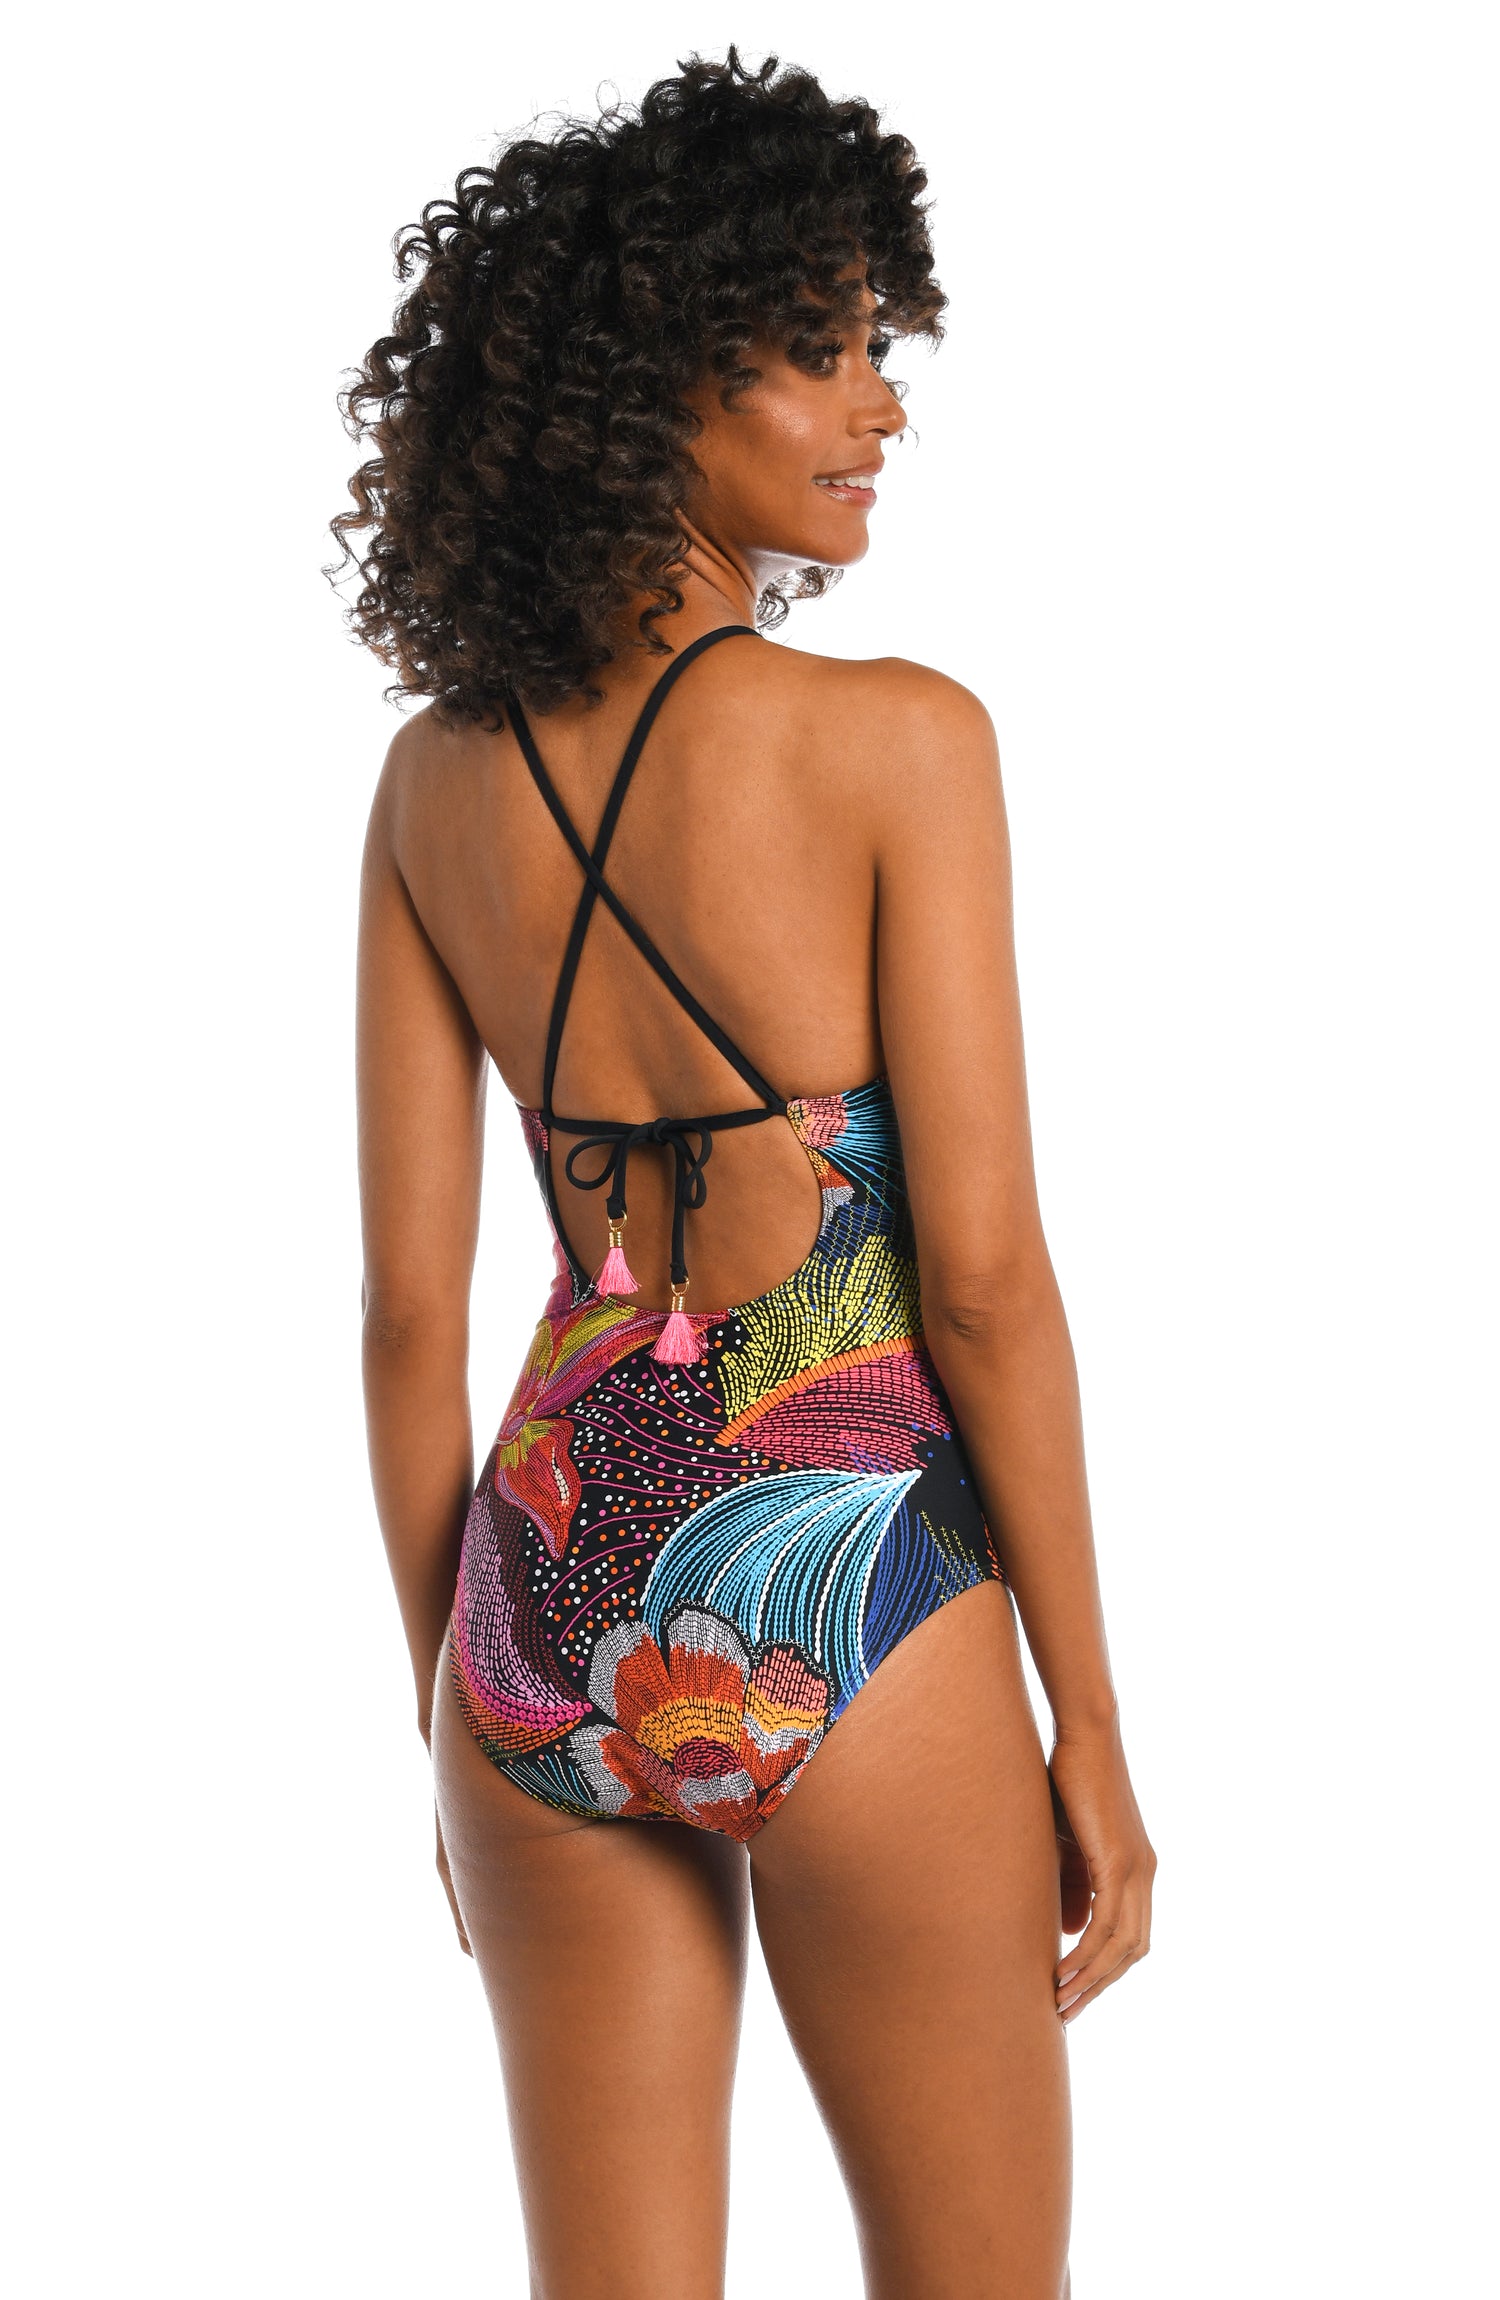 Model is wearing a shiny multicolored tropical printed high neck one piece from our Sunlit Soriee collection!